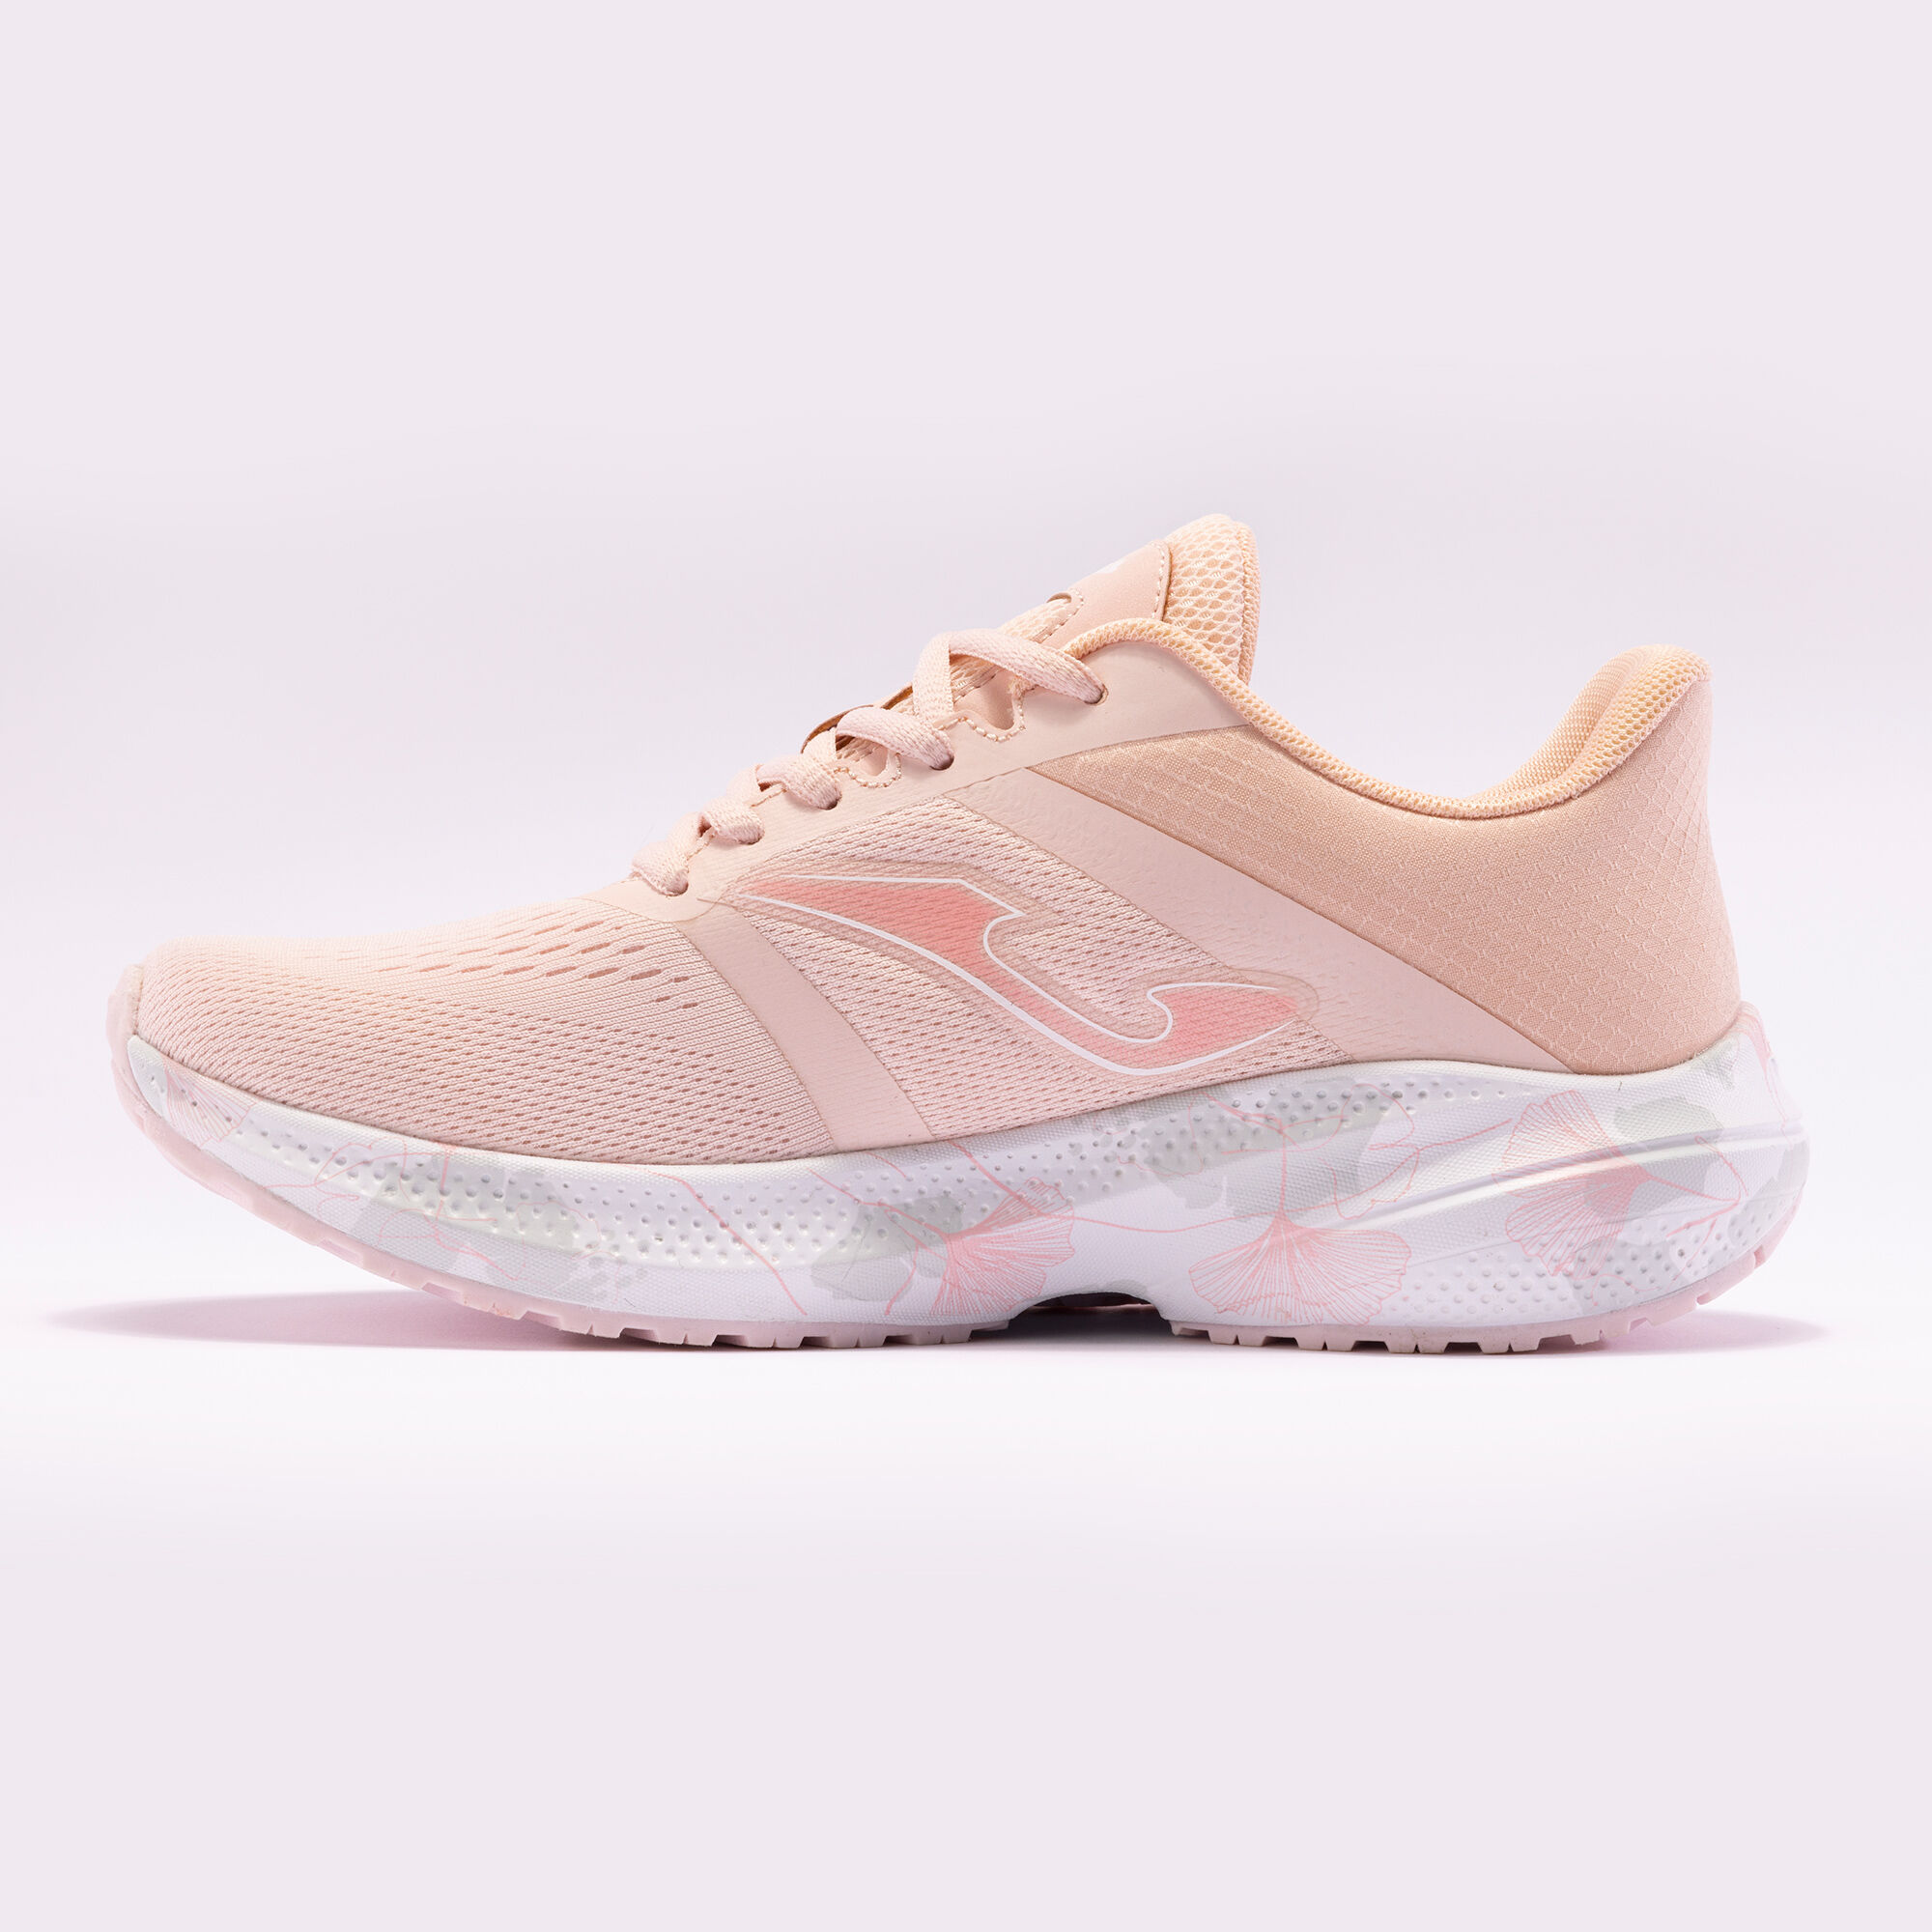 Running shoes Elite Lady 24 woman pink